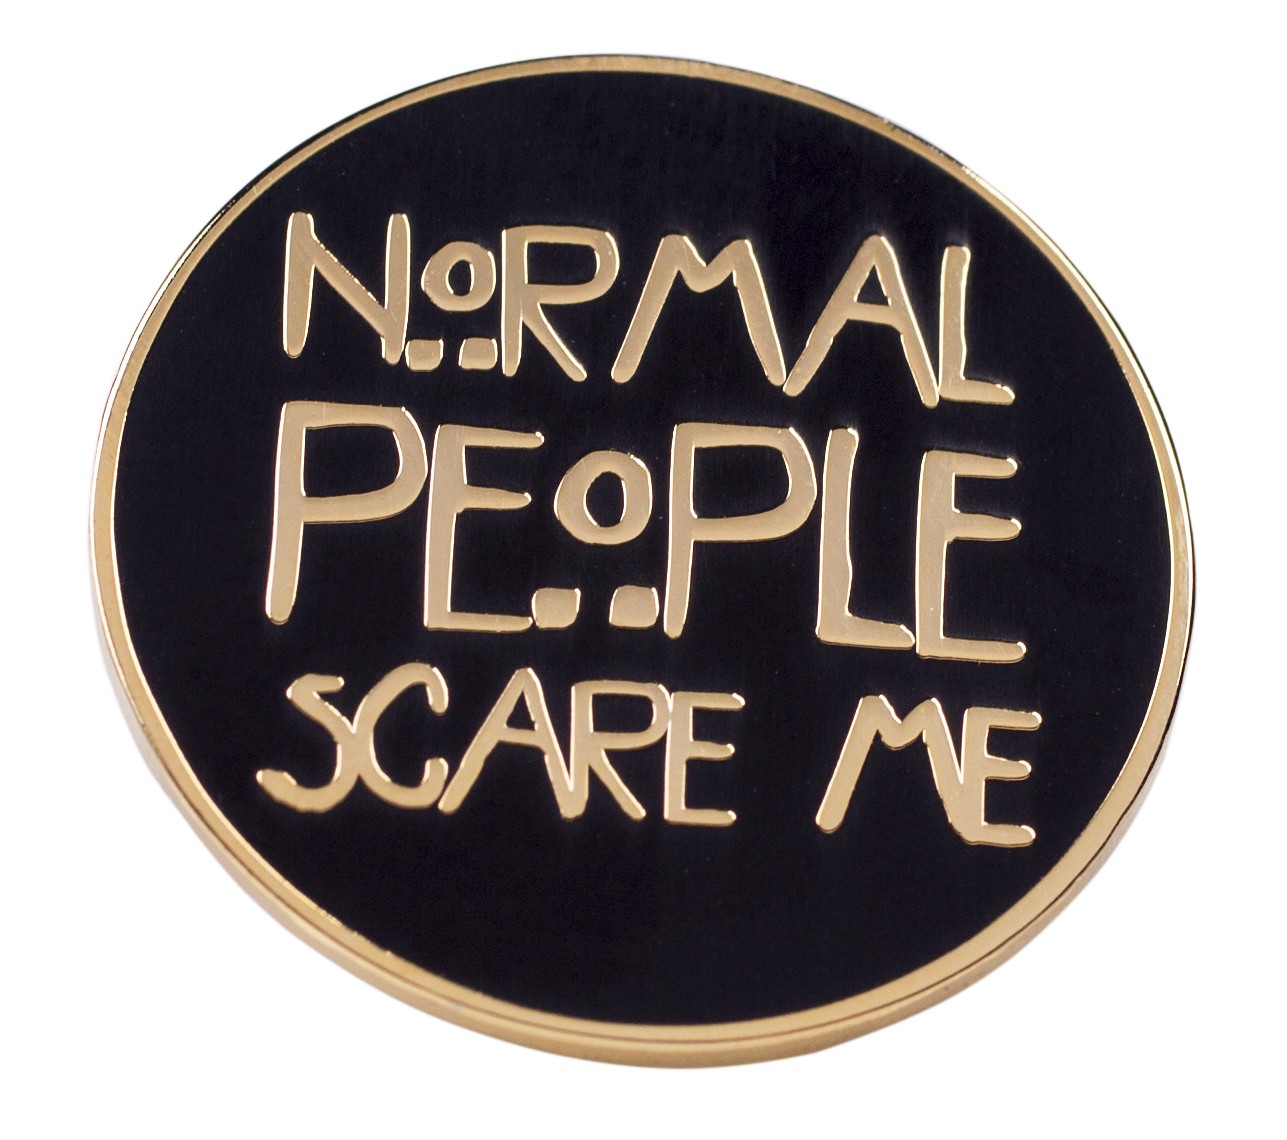 American Horror Story Inspired Normal People Scare Me Enamel Pin From